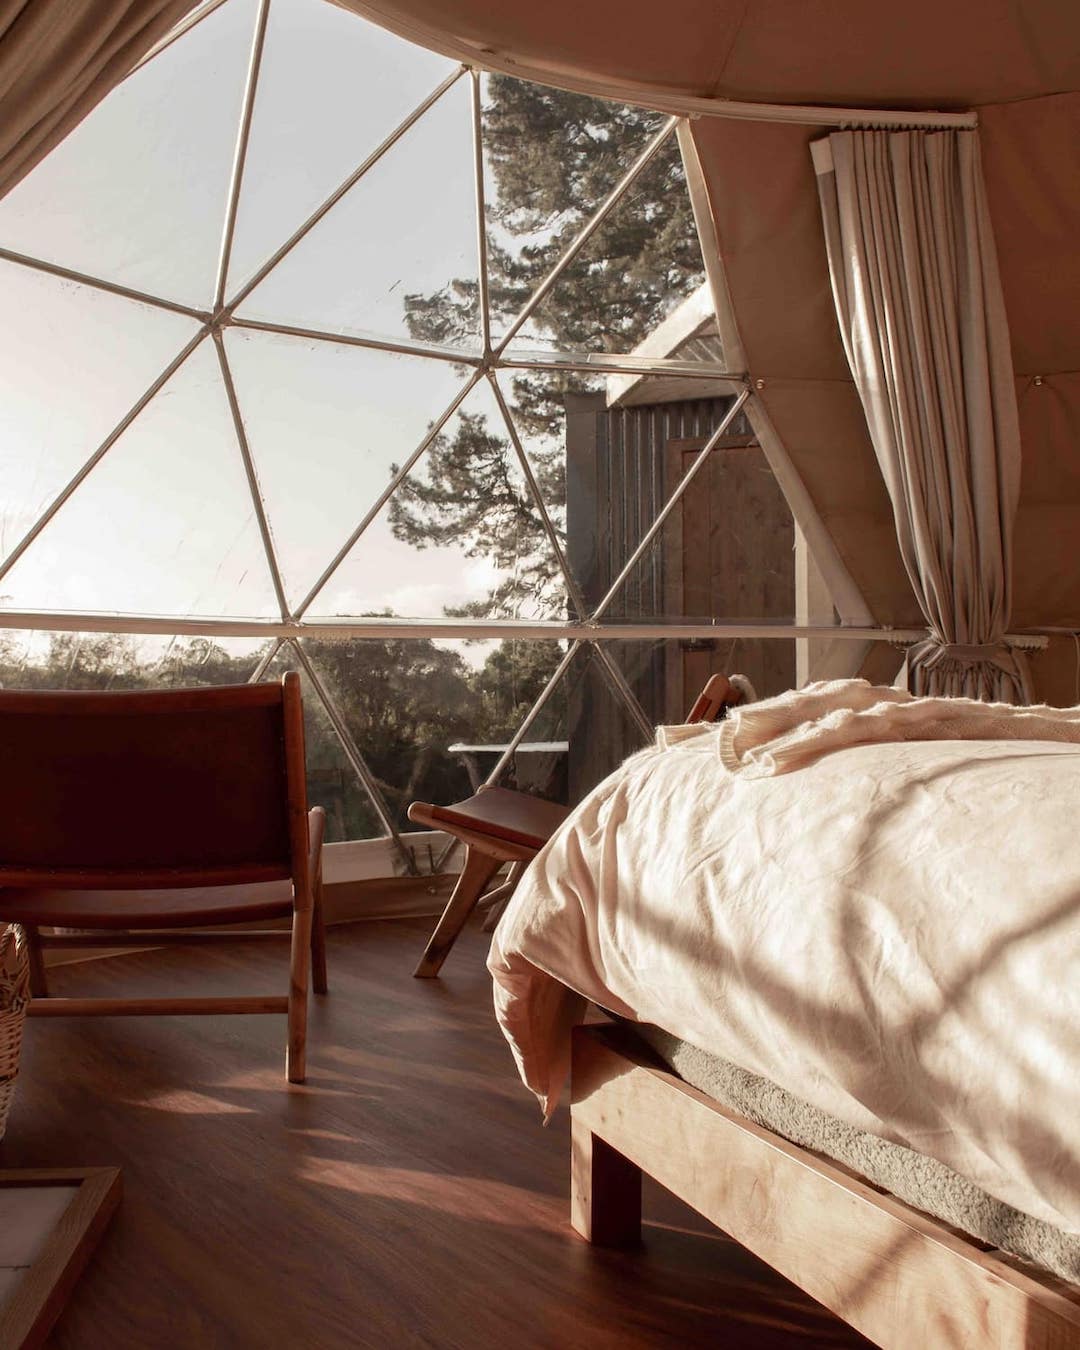 A geodesic dome is seen from the inside.